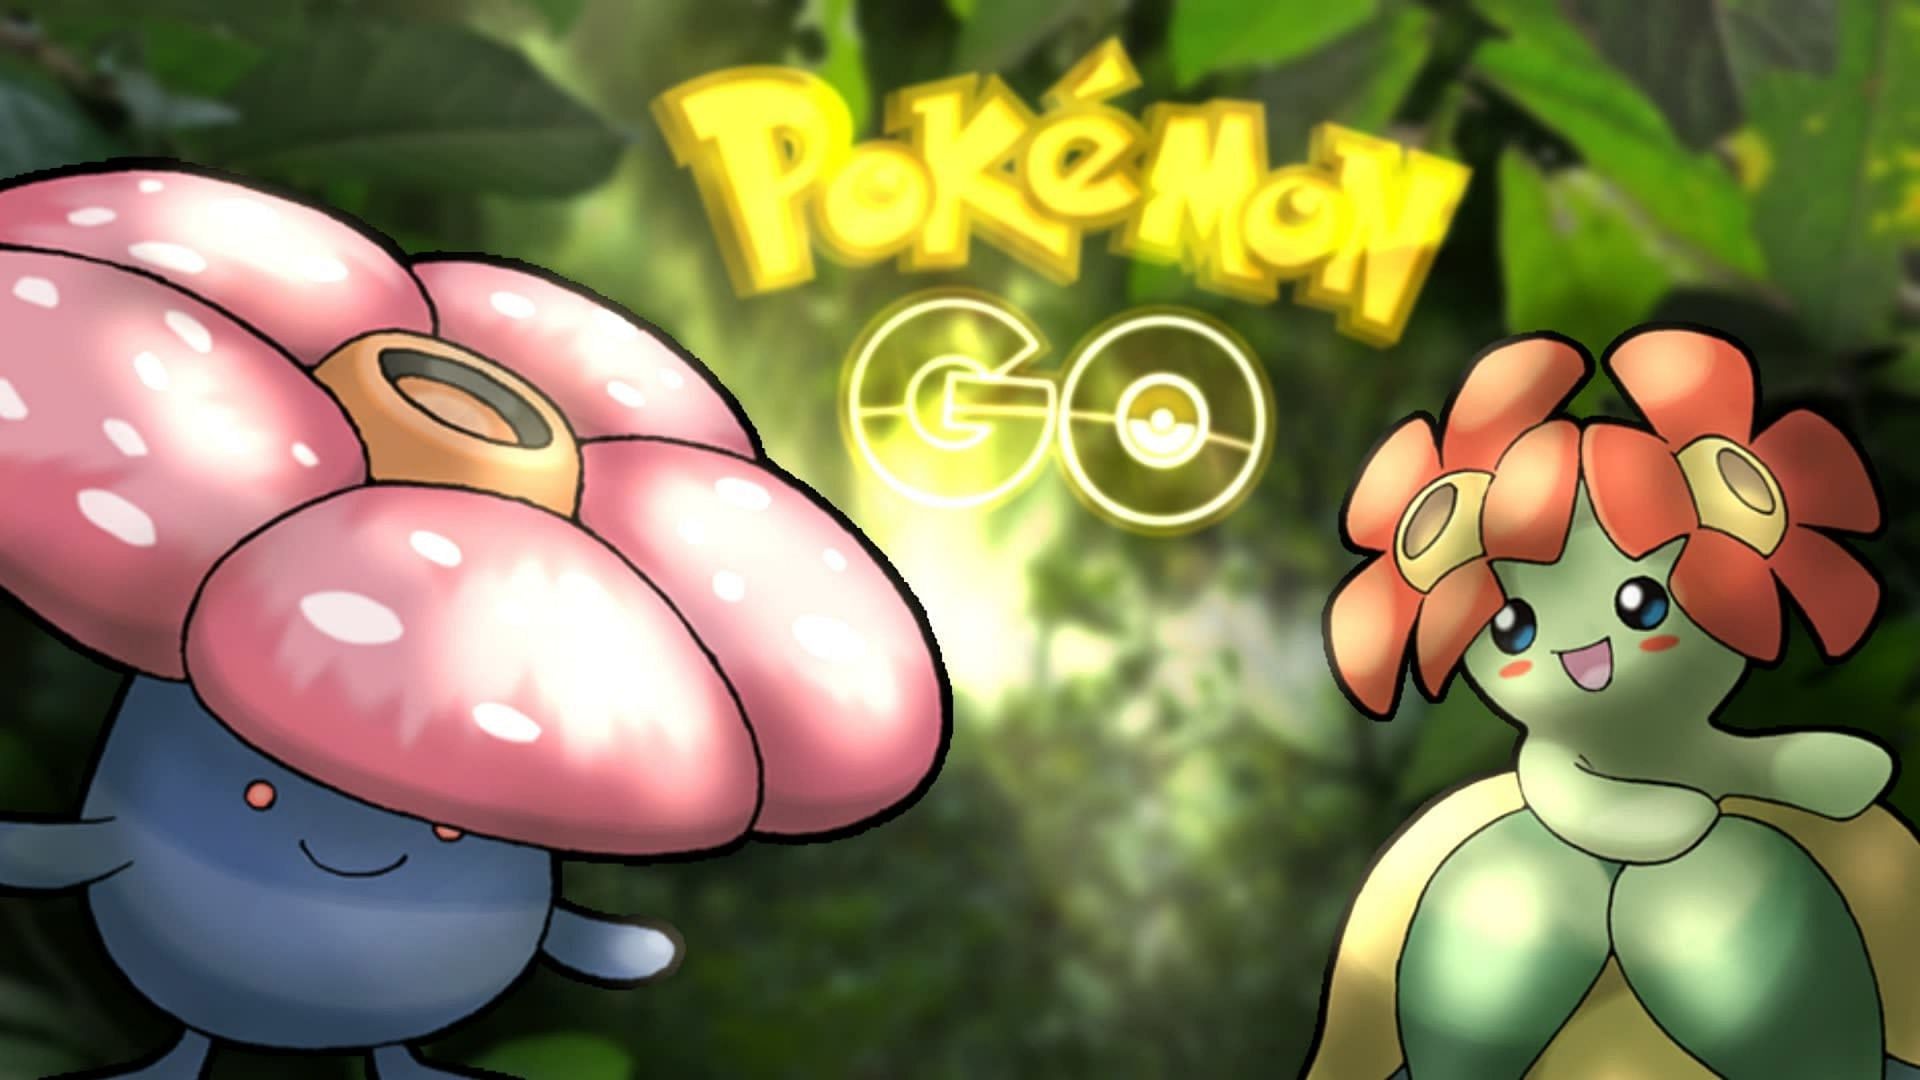 Bellossom (right) is currently a 3-star Raid boss in Pokemon GO (Image via Niantic)